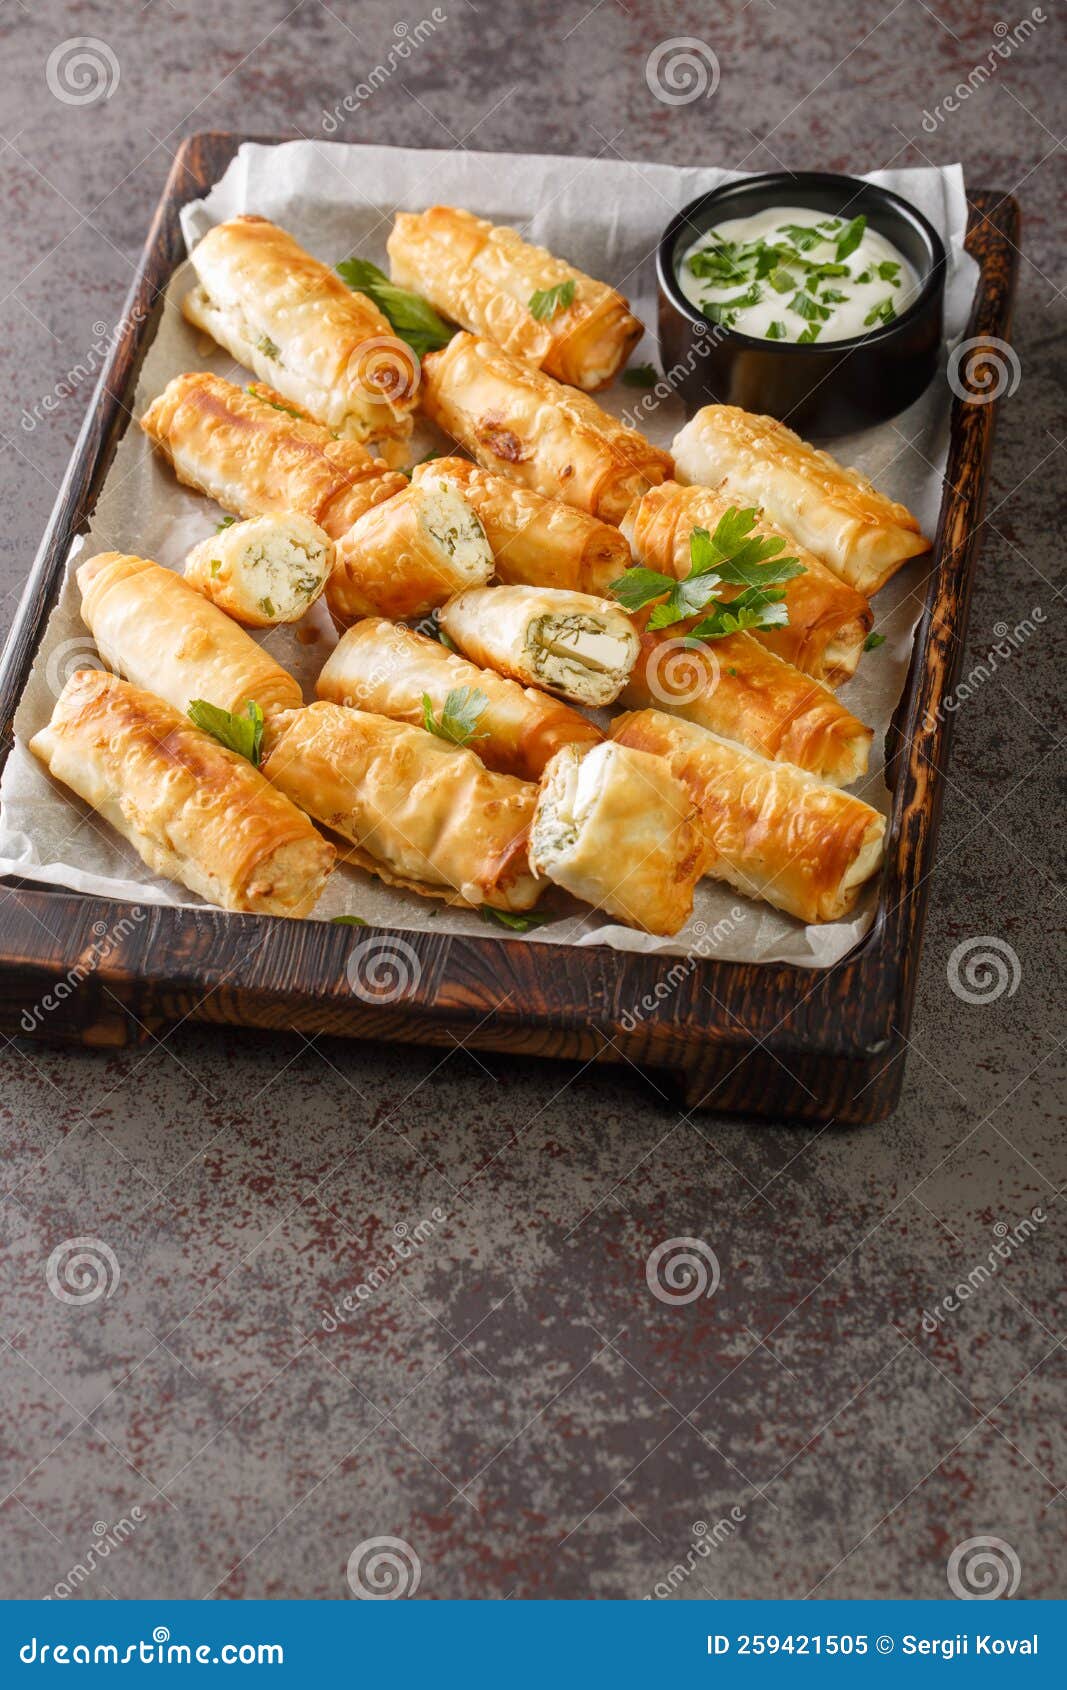 sigara boregi is a famous turkish deep-fried pastry crispy rolls of thin dough are stuffed with a creamy mixture of cheese and